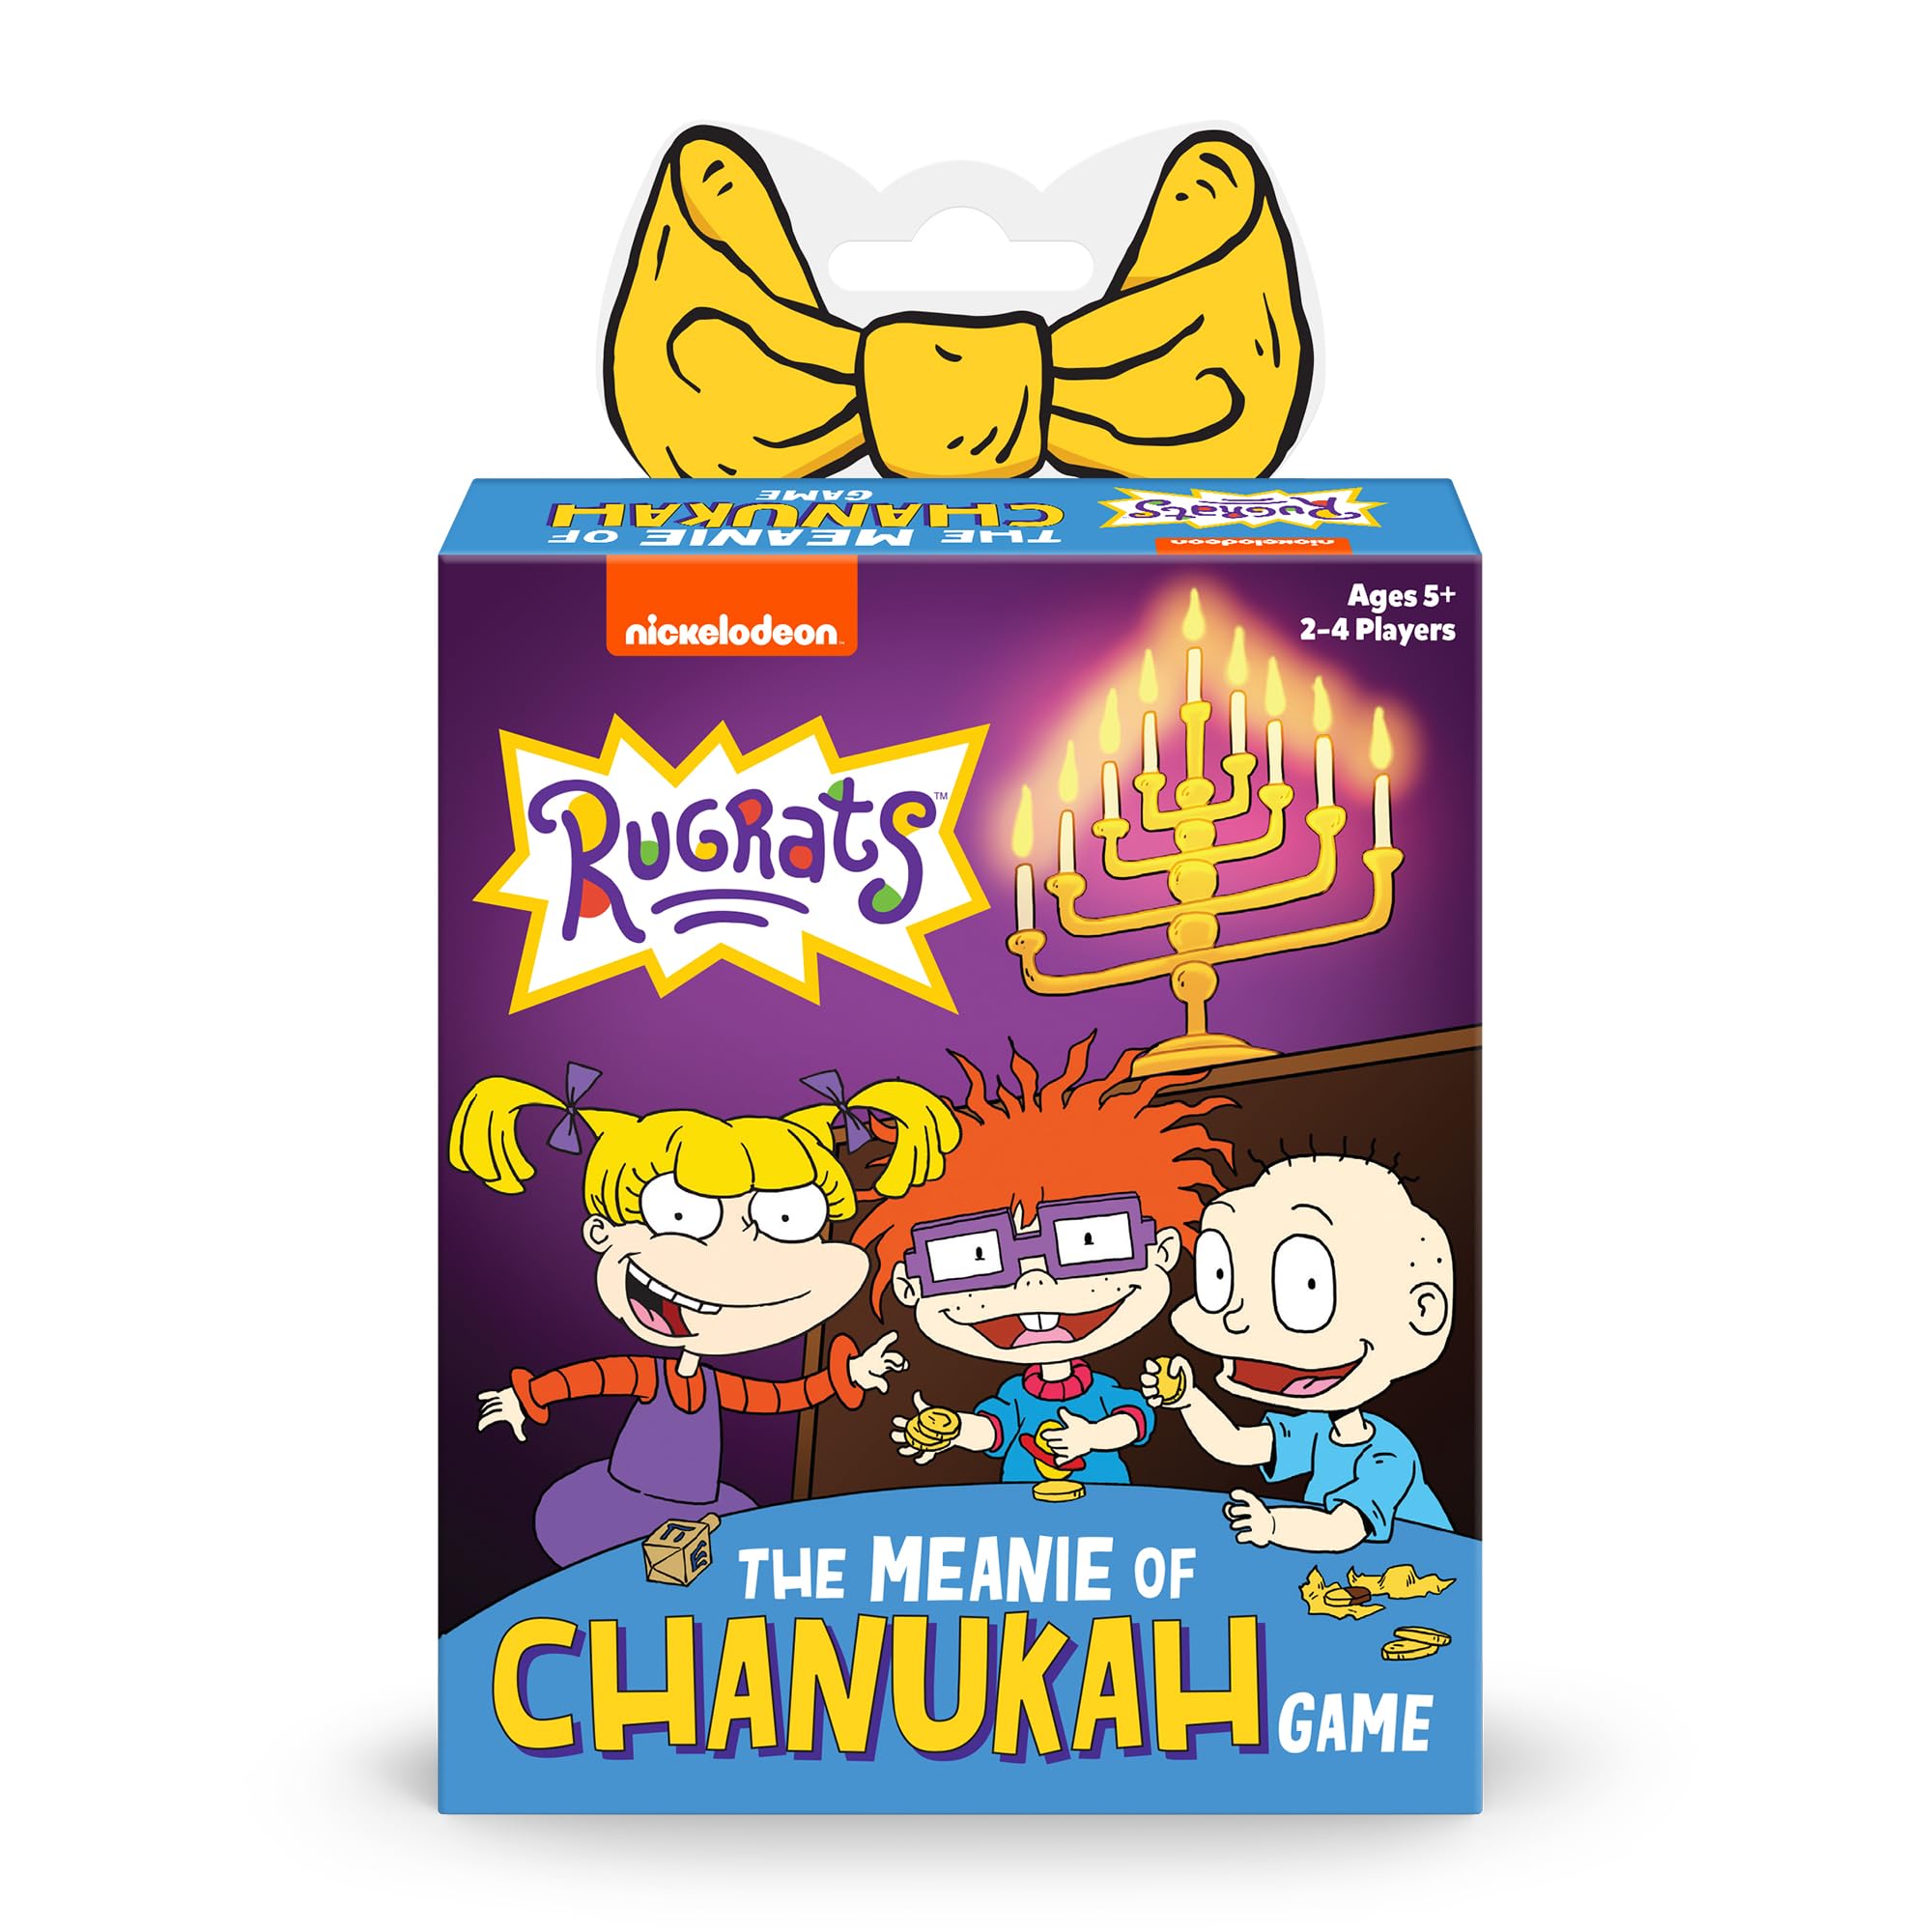 Funko Games: Rugrats The Meanie of Chanukah Game $3.49, Rudolph The Red-Nosed Reindeer Snowstorm Scramble Game $3.83 + Free Shipping w/ Prime or on $35+